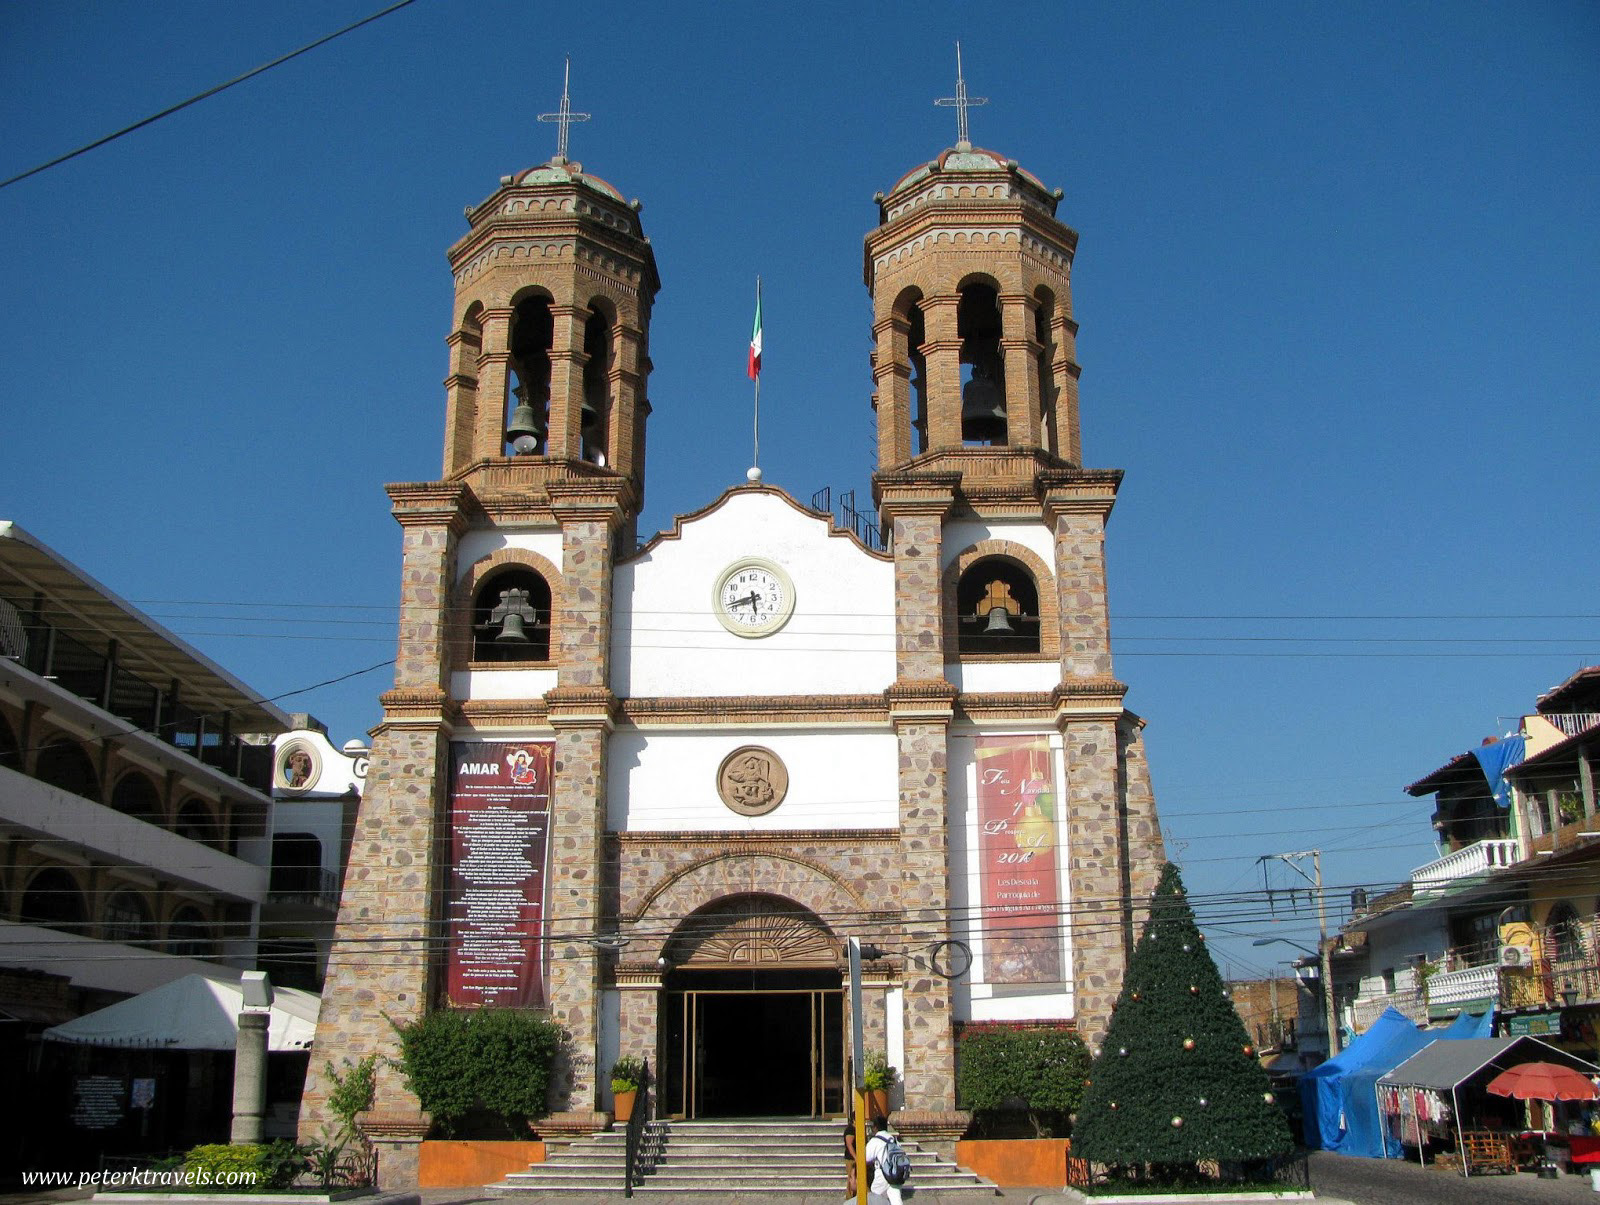 The church of San Miguel Archangel